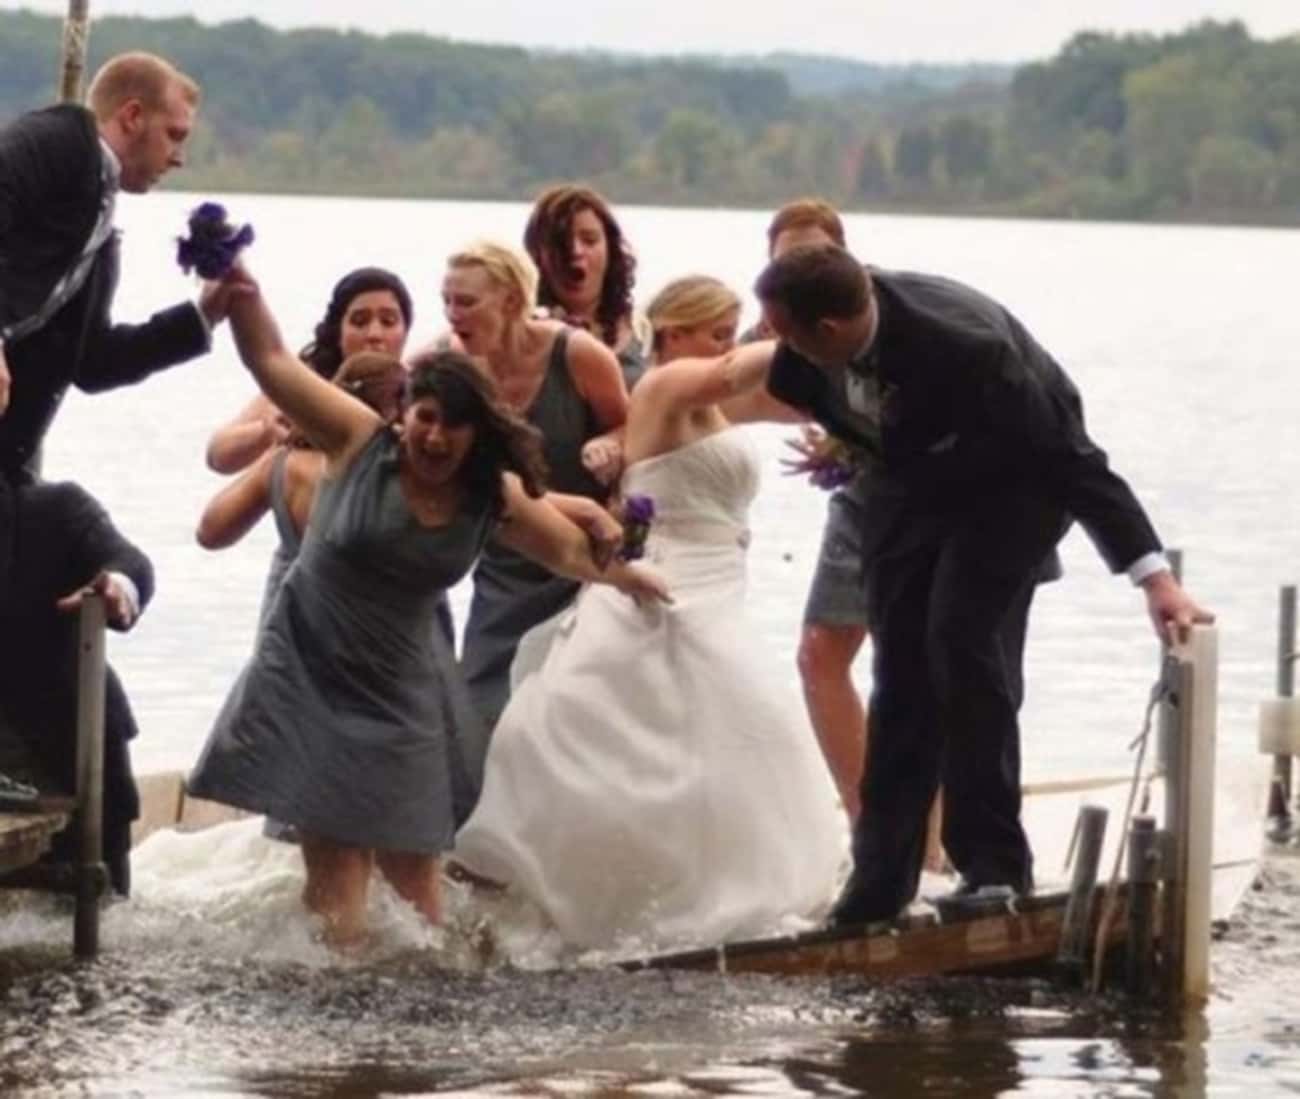 The Moment They Realized Their Wedding Party Might Be Too Big